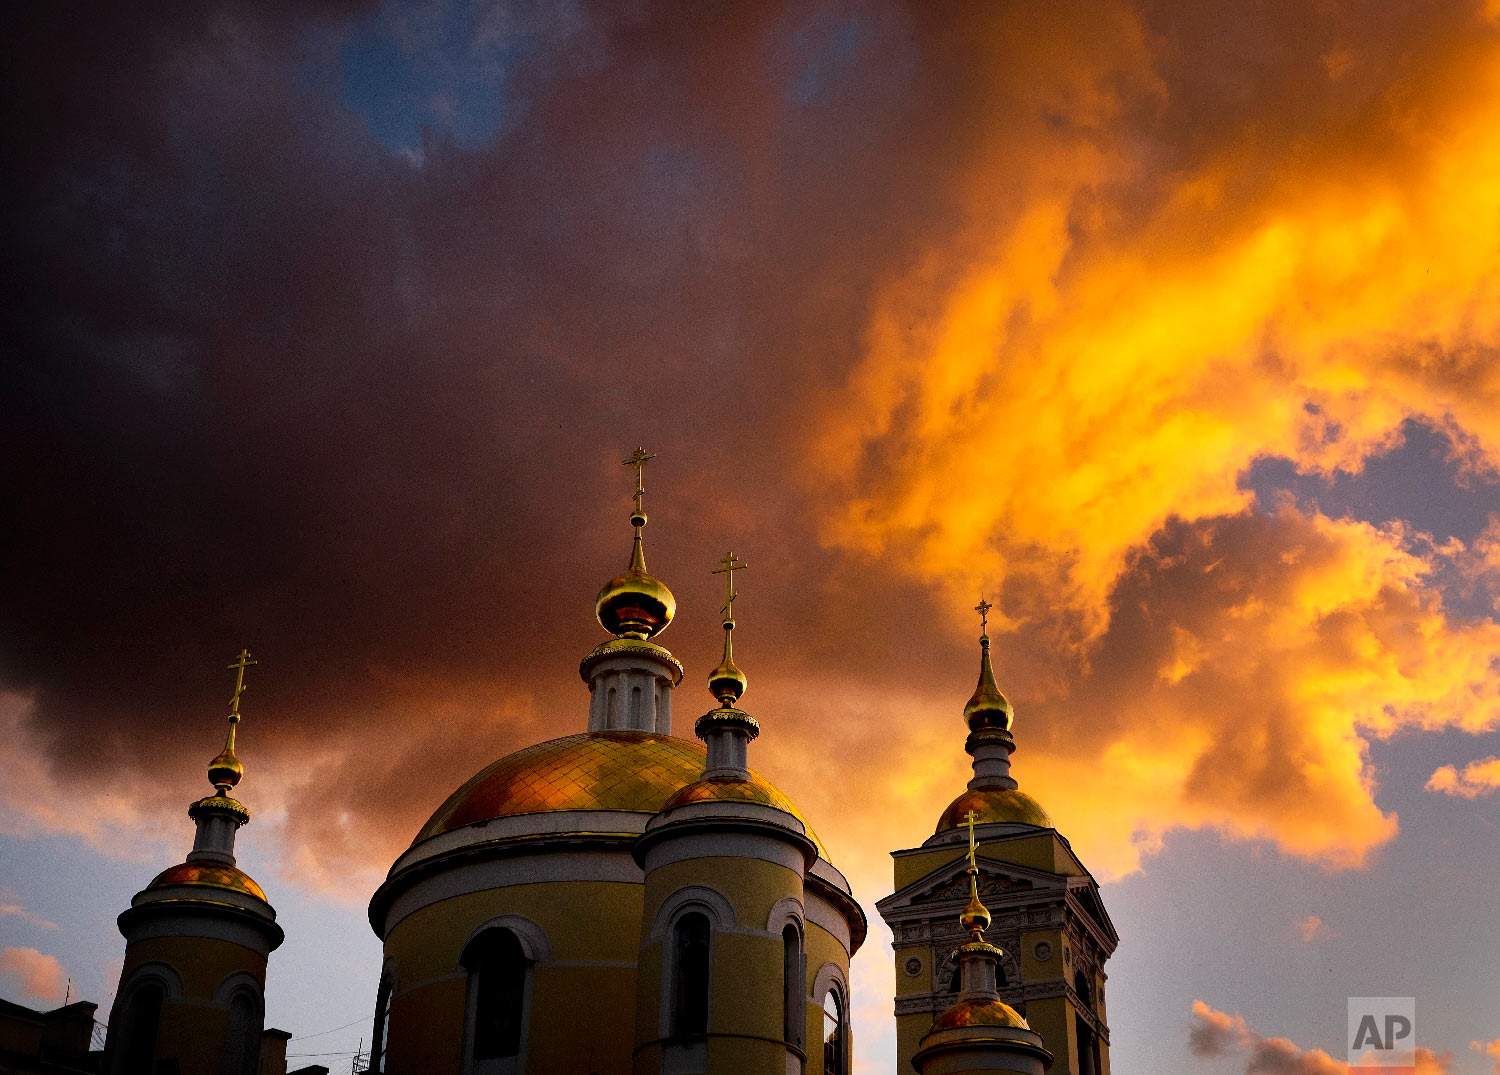  Clouds are illuminated by the sun setting sun over a church during the 2018 soccer World Cup in Podolsk near Moscow, Russia on June 19, 2018. (AP Photo/Michael Probst) 